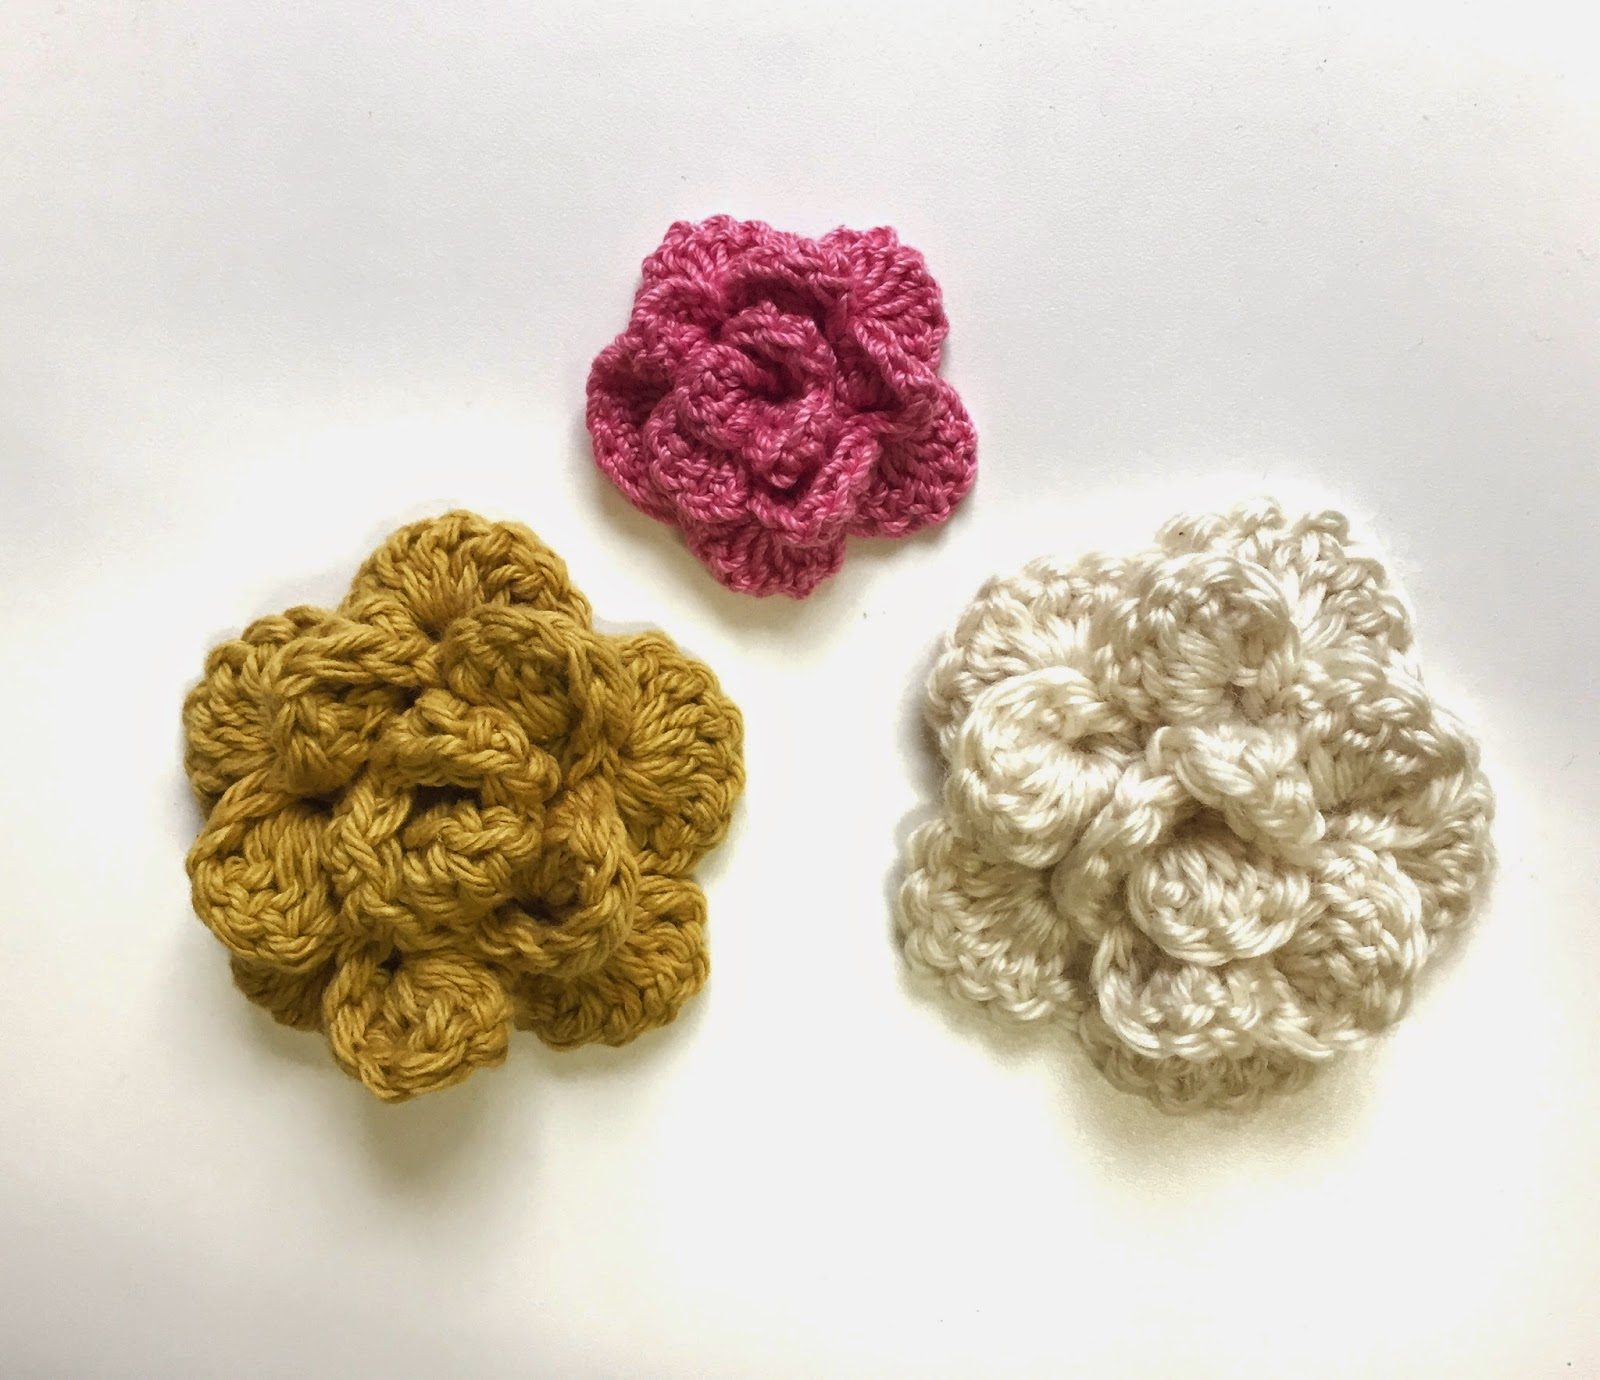 Crochet Hair Clip Patterns Free Free Pattern Friday Crochet Flowers From The Allicraft Blog